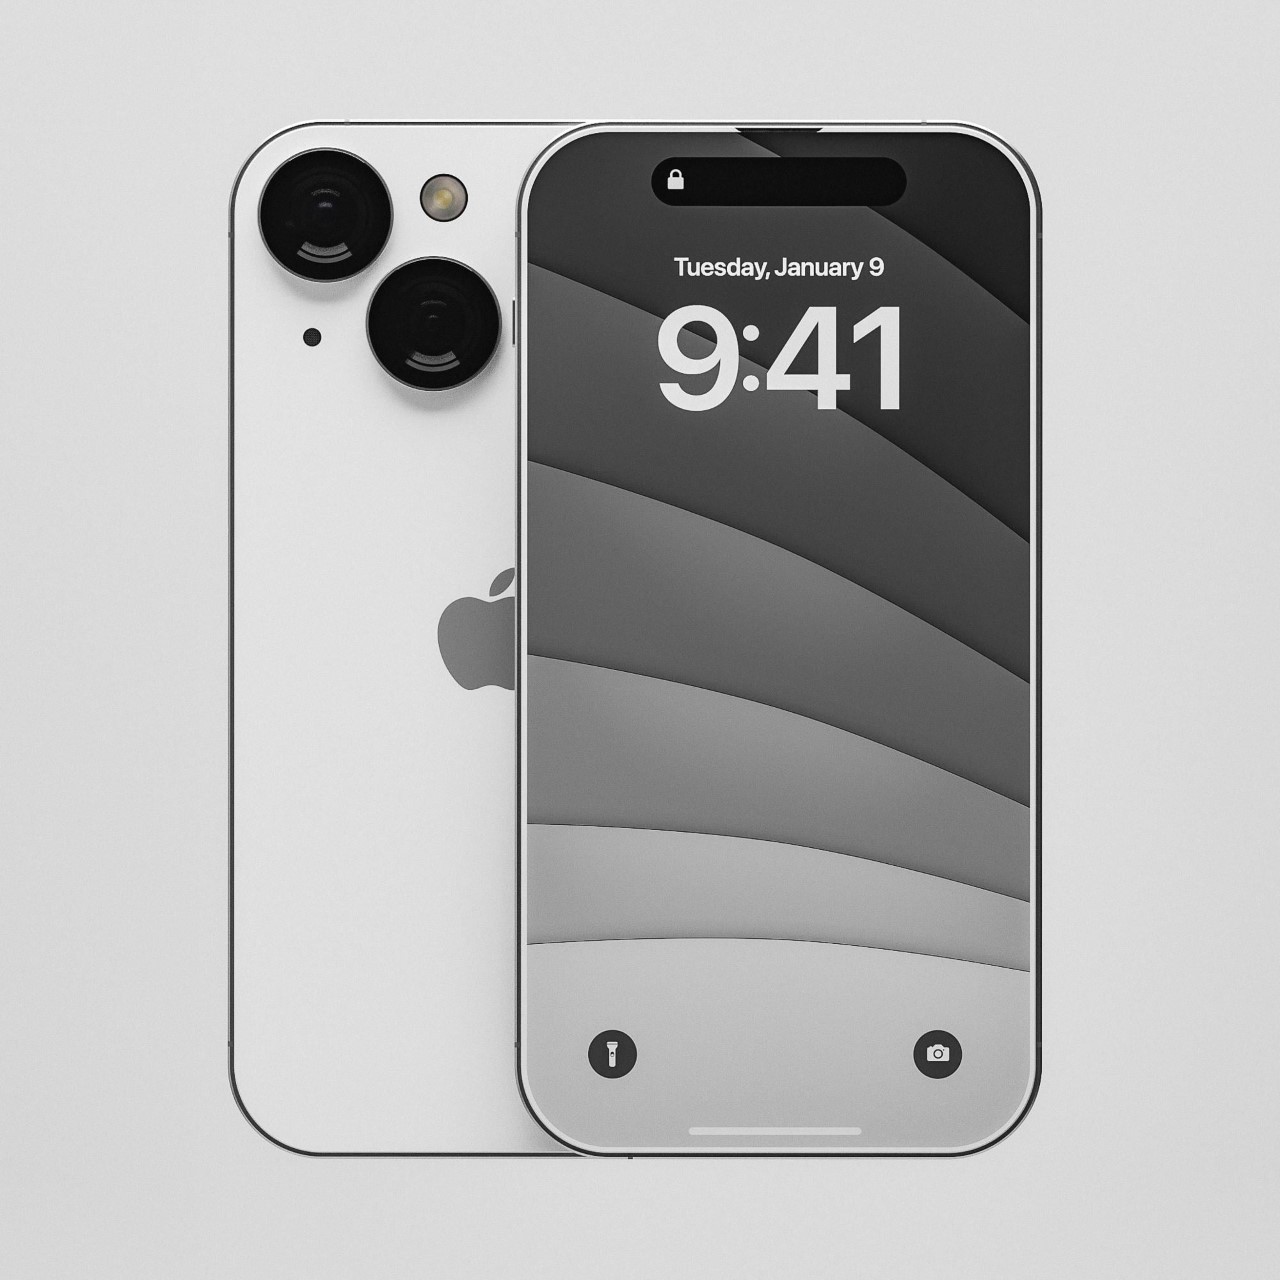 Modern iPhone 4 concept shows what the iconic Apple smartphone